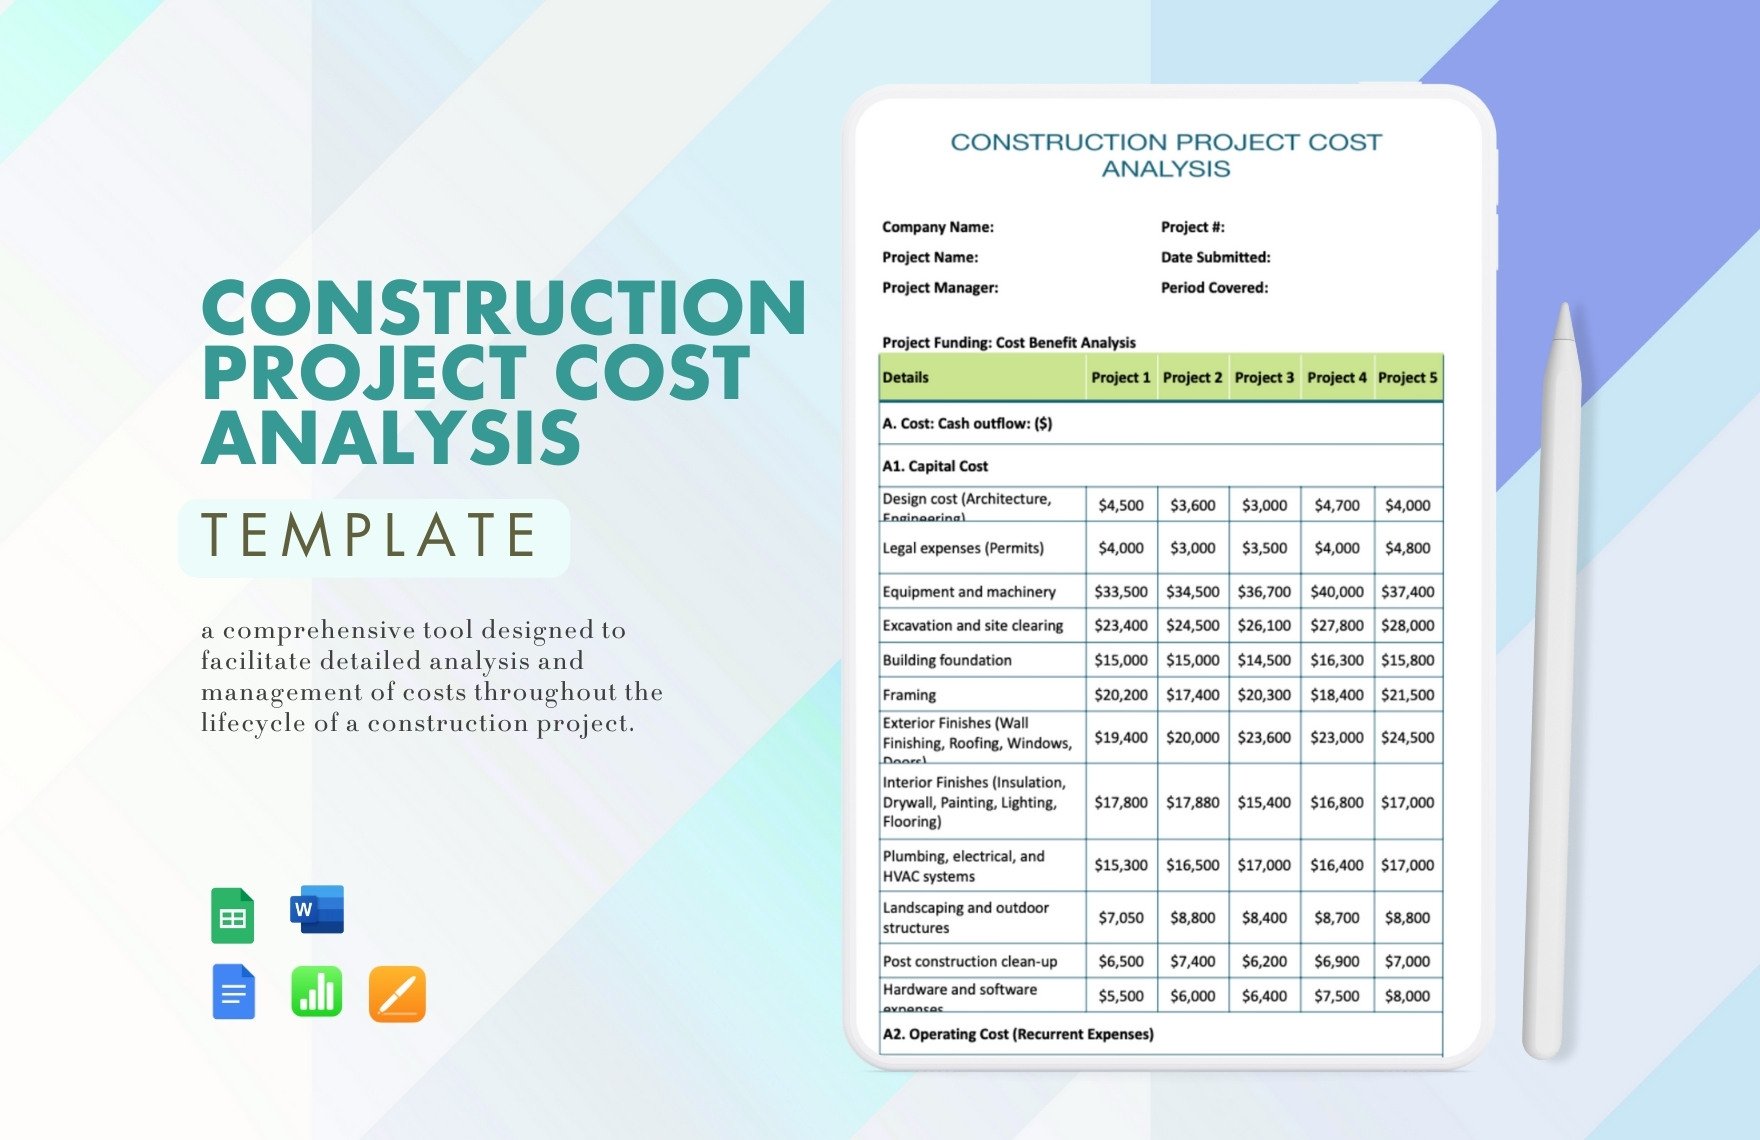 Construction Project Cost Analysis Template in Word, Google Docs, Google Sheets, Apple Pages, Apple Numbers